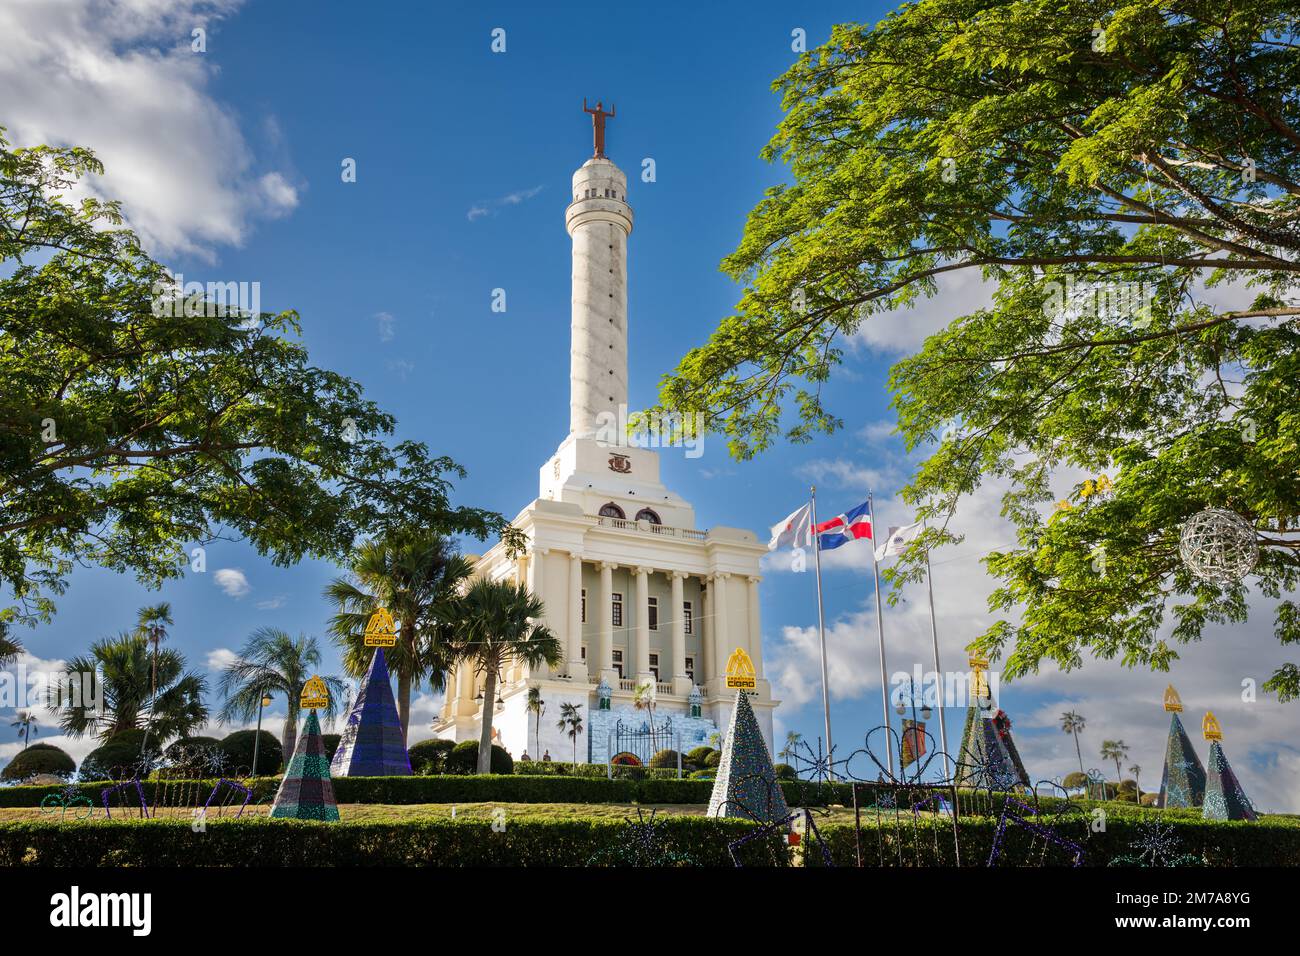 The Monument to the Heroes Santiago De Los Caballeros in the Dominican Republic Stock Photo